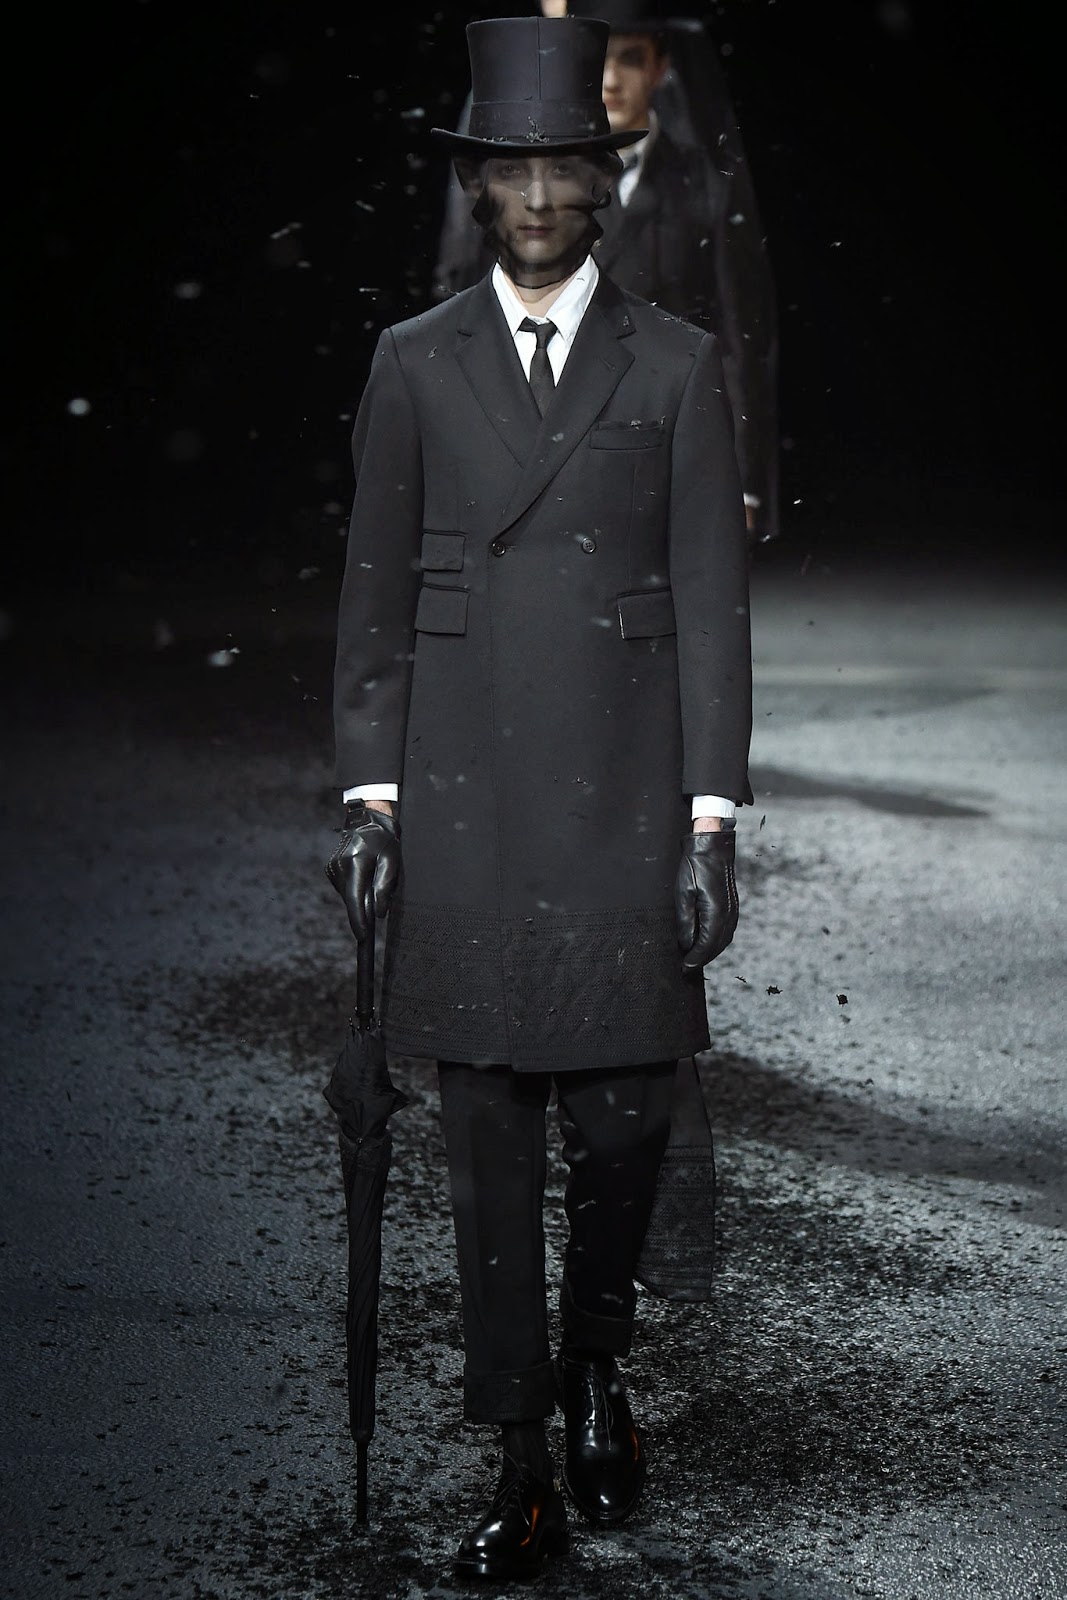 DAPPER KID - a men's fashion and dress blog: The Funeral March